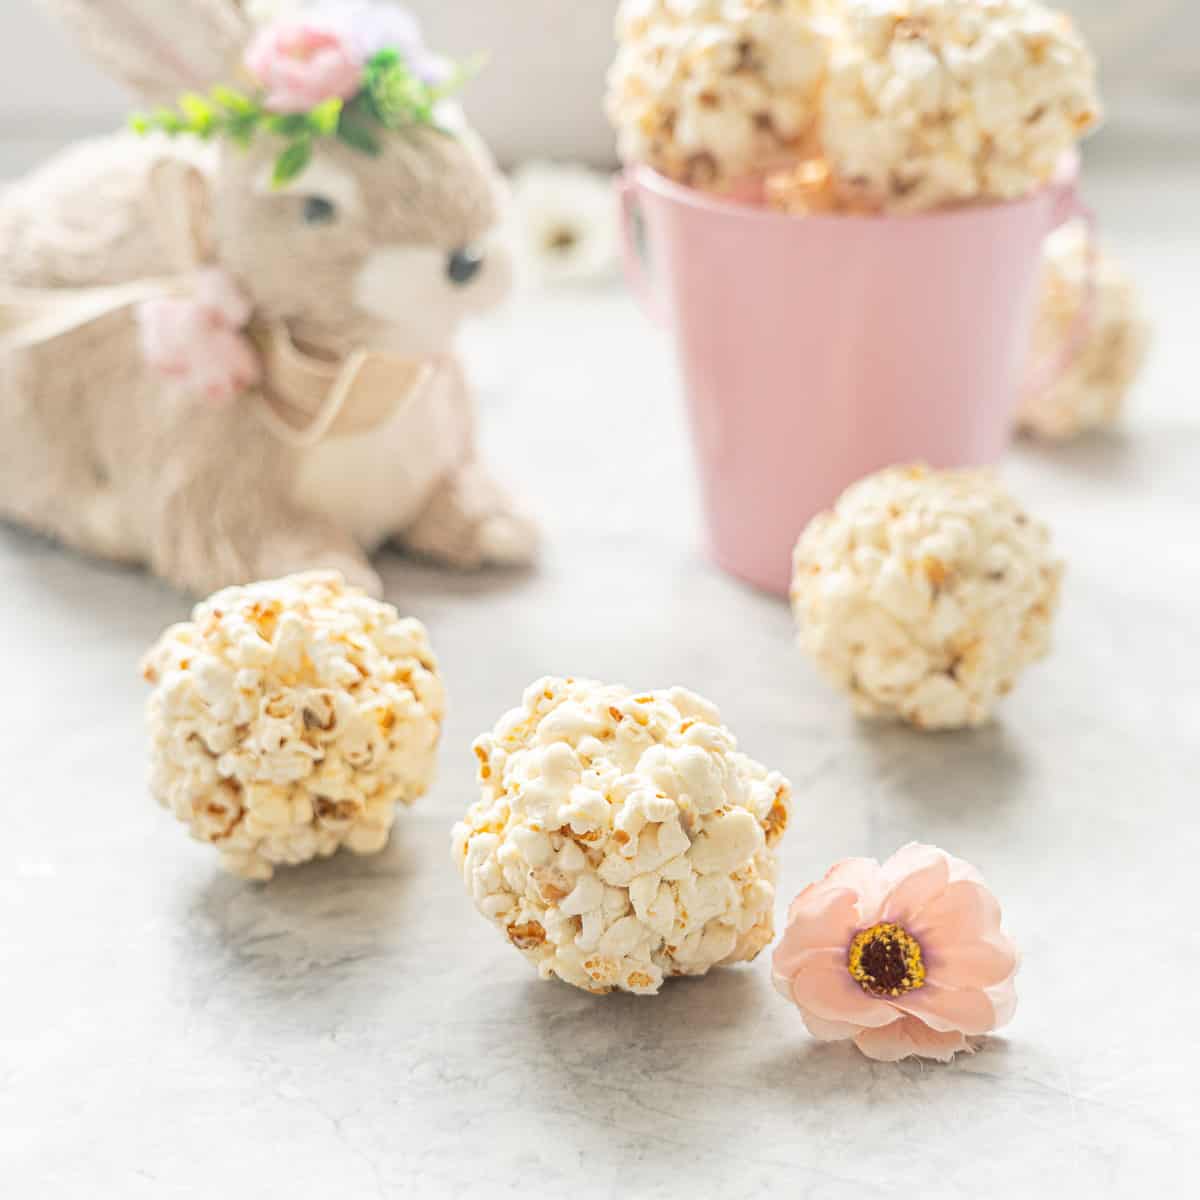 Three tennis ball sized balls of popcorn on a bench in front of a decorative easter bunny and spring flowers.